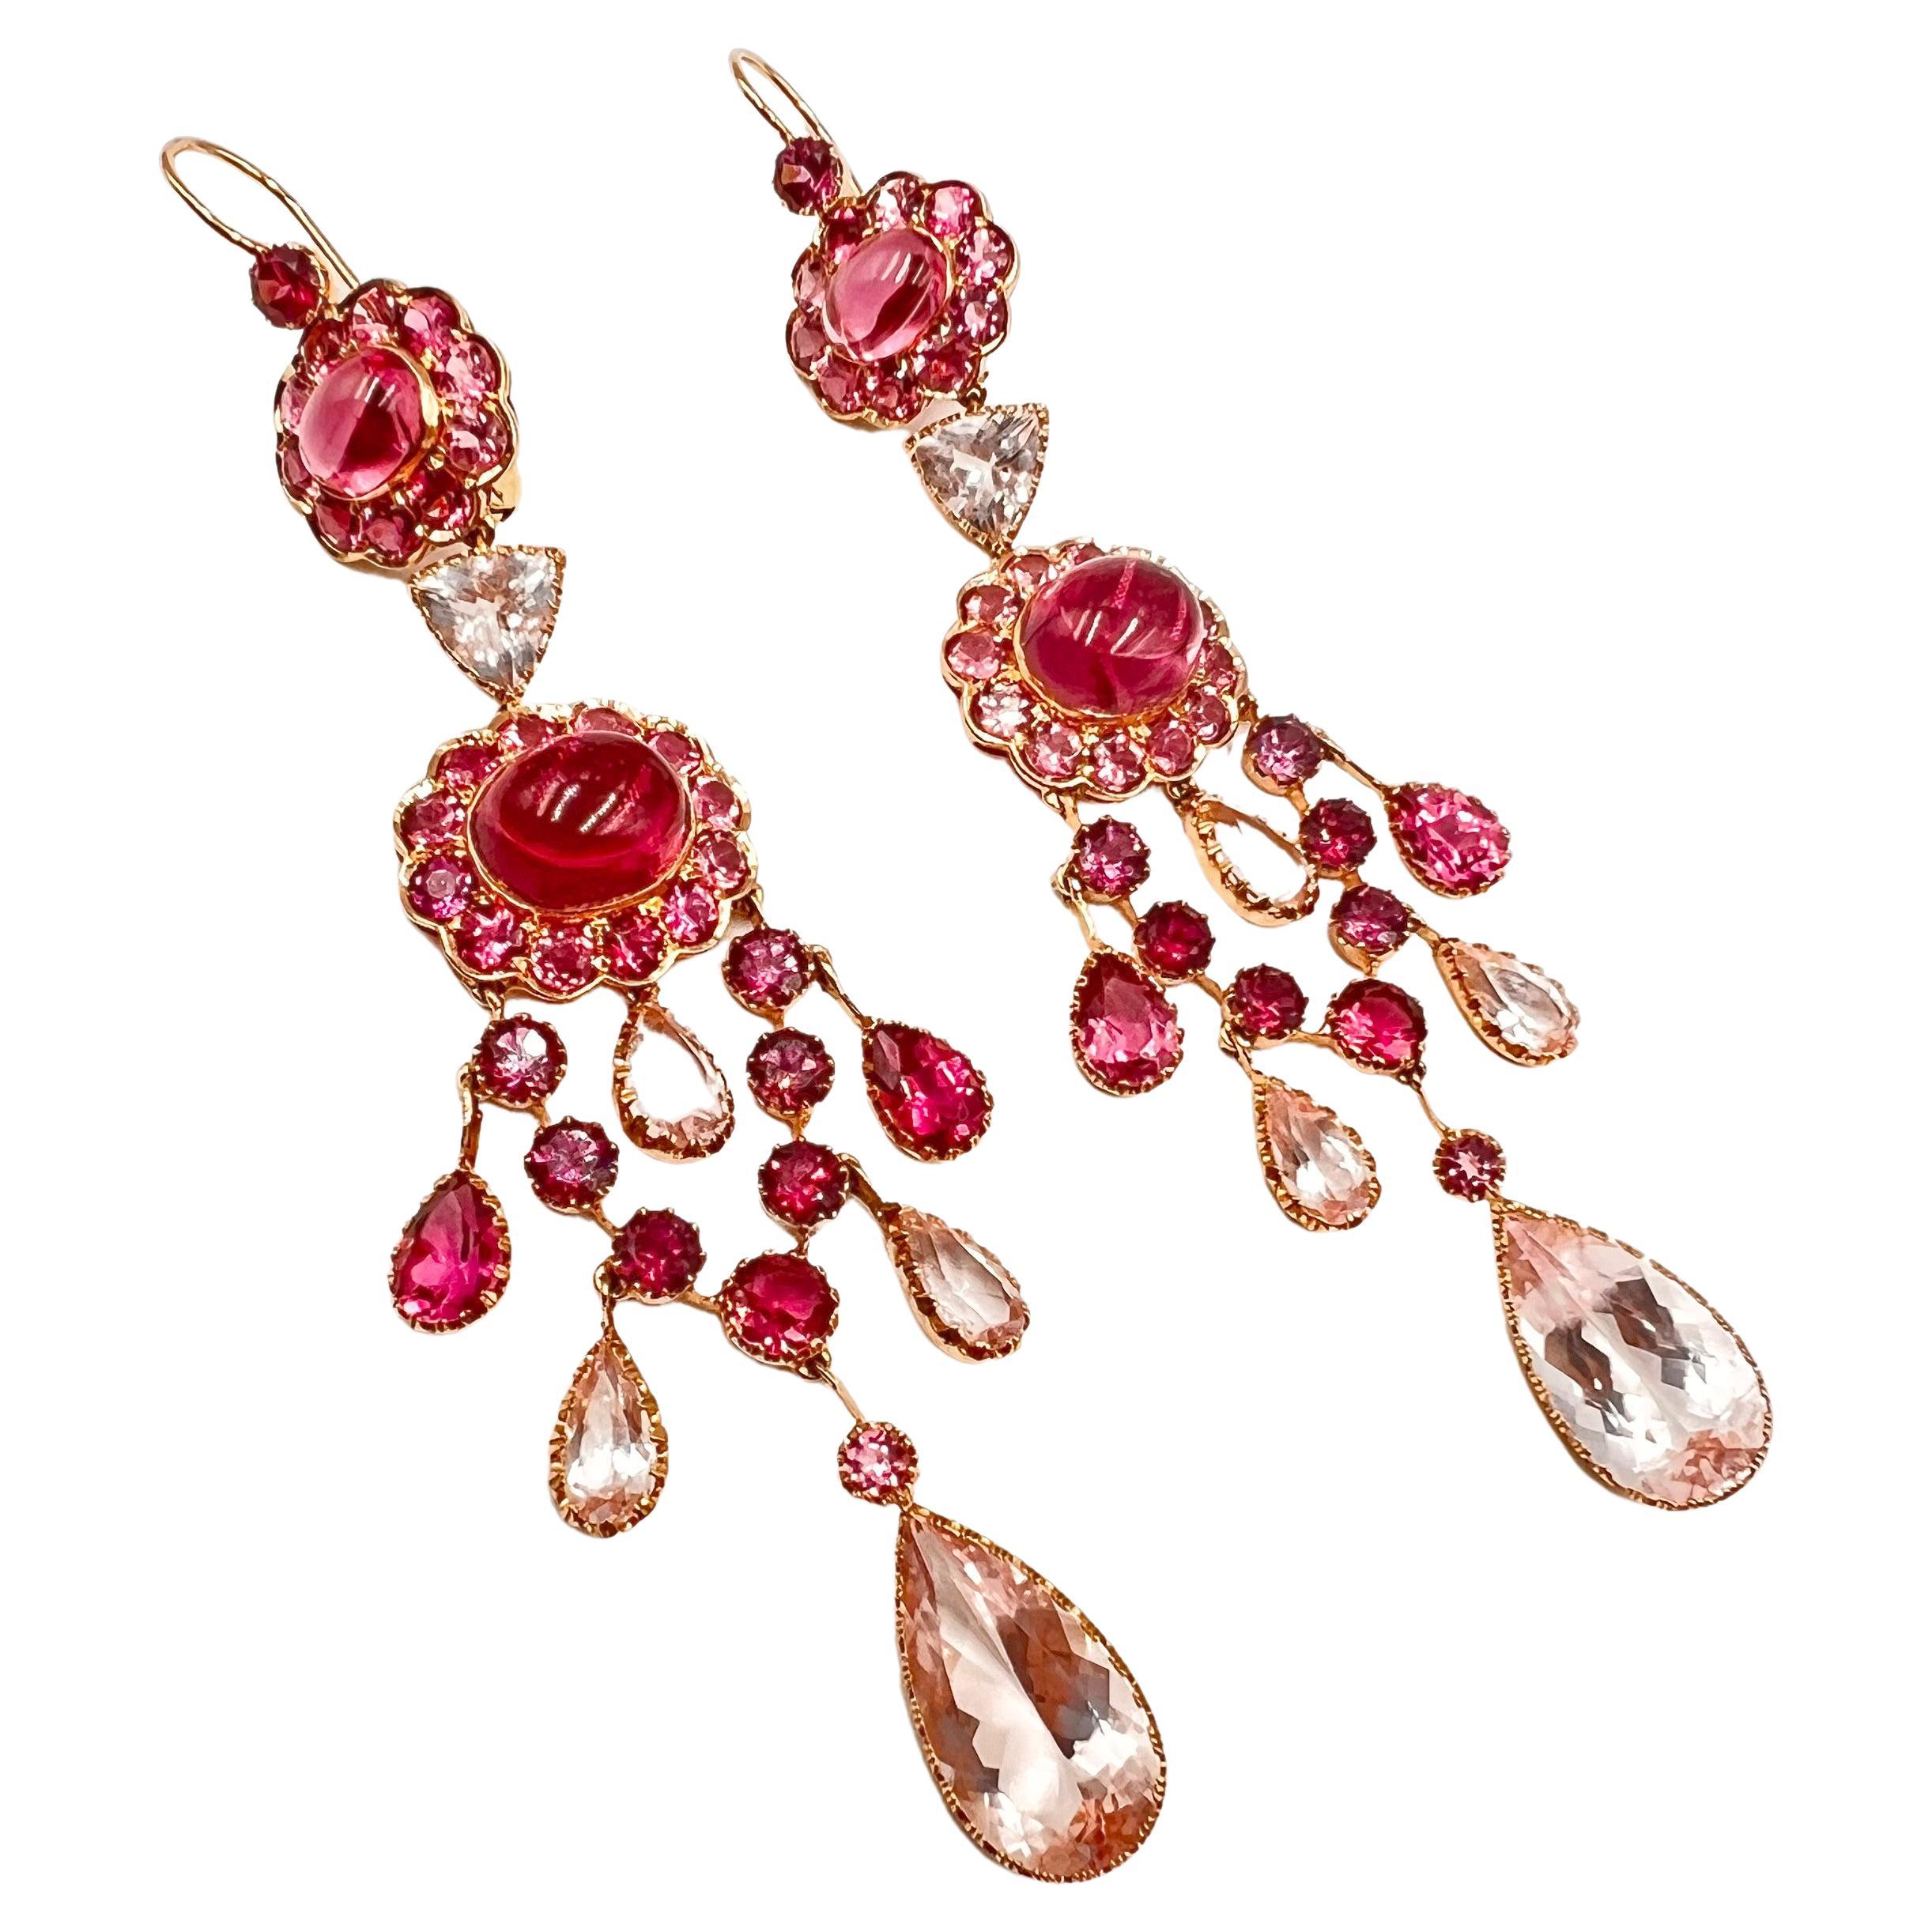 Cascading drops of pink tourmaline and rubellite set in chandelier style earrings.  Round, oval, triangular and pear shape, faceted and cabochon cut, pink tourmaline in various shades of lighter and darker pink tourmaline (also known as rubellite),